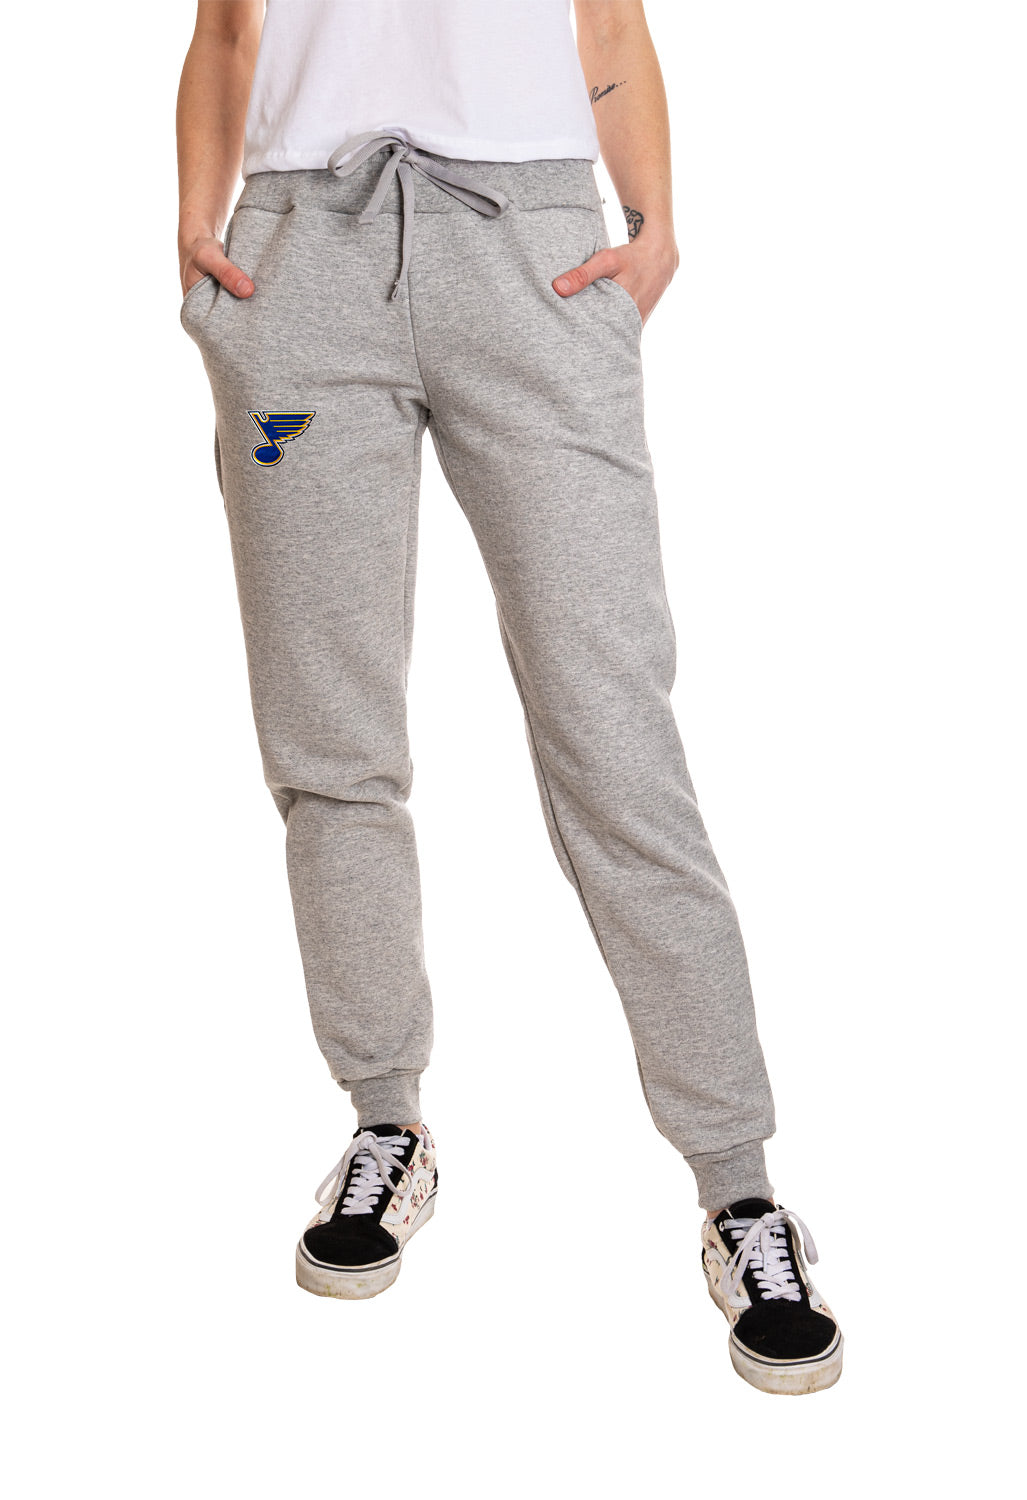 St. Louis Blues Ladies Cuffed Jogger Style Track Pants